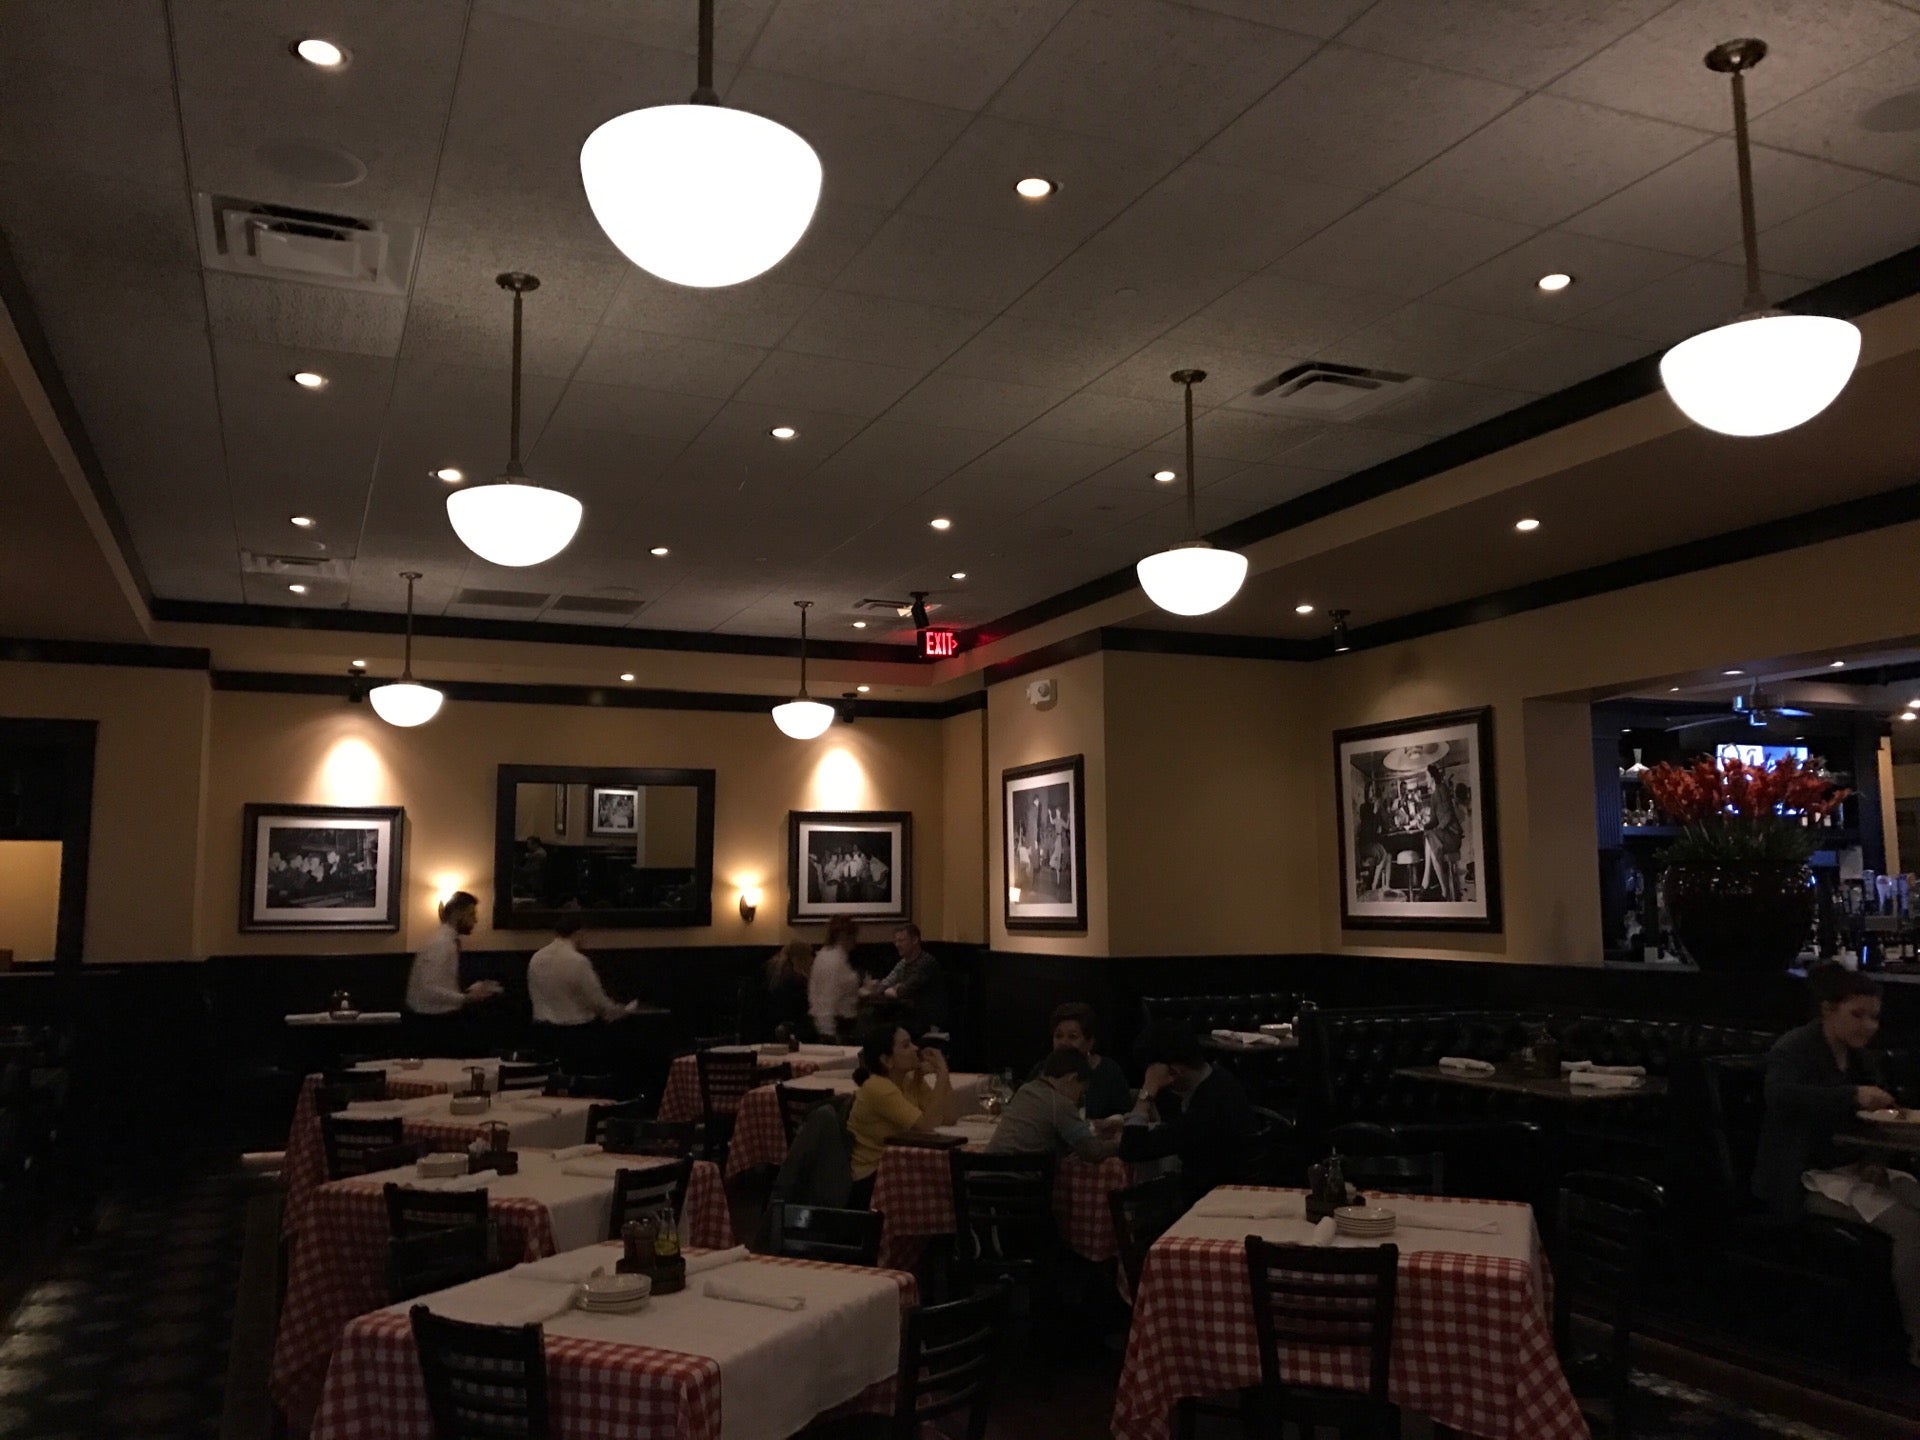 SPRINGFIELD TOWN CENTER FOOD COURT  6500 Springfield Mall, Springfield,  Virginia - Food Court - Restaurant Reviews - Yelp